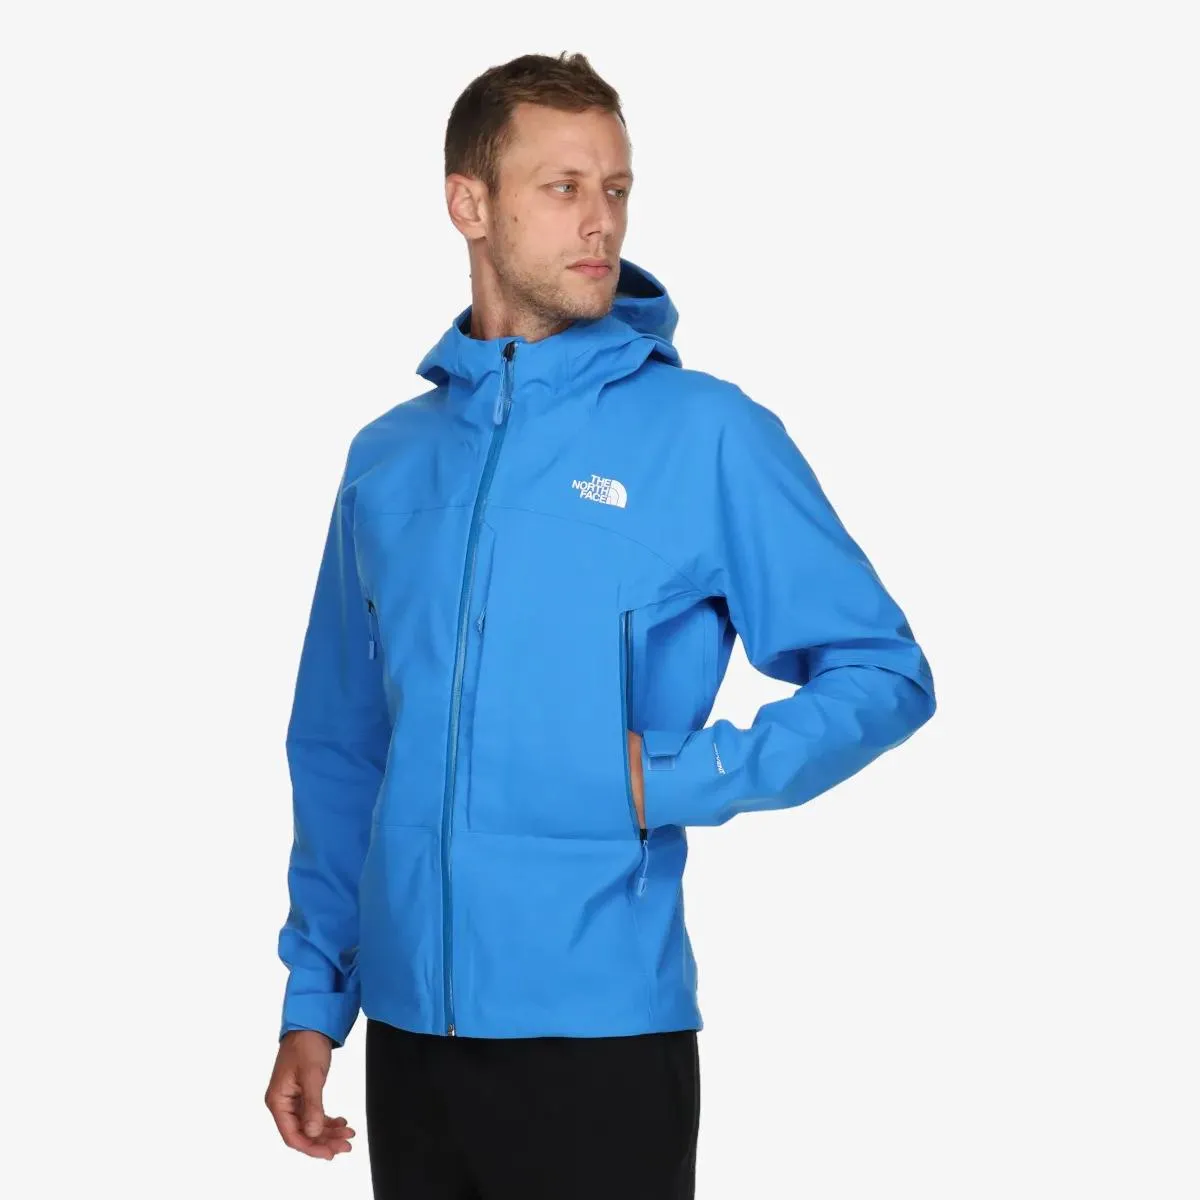 The North Face Jakna Stolemberg 3l DryVent™ 